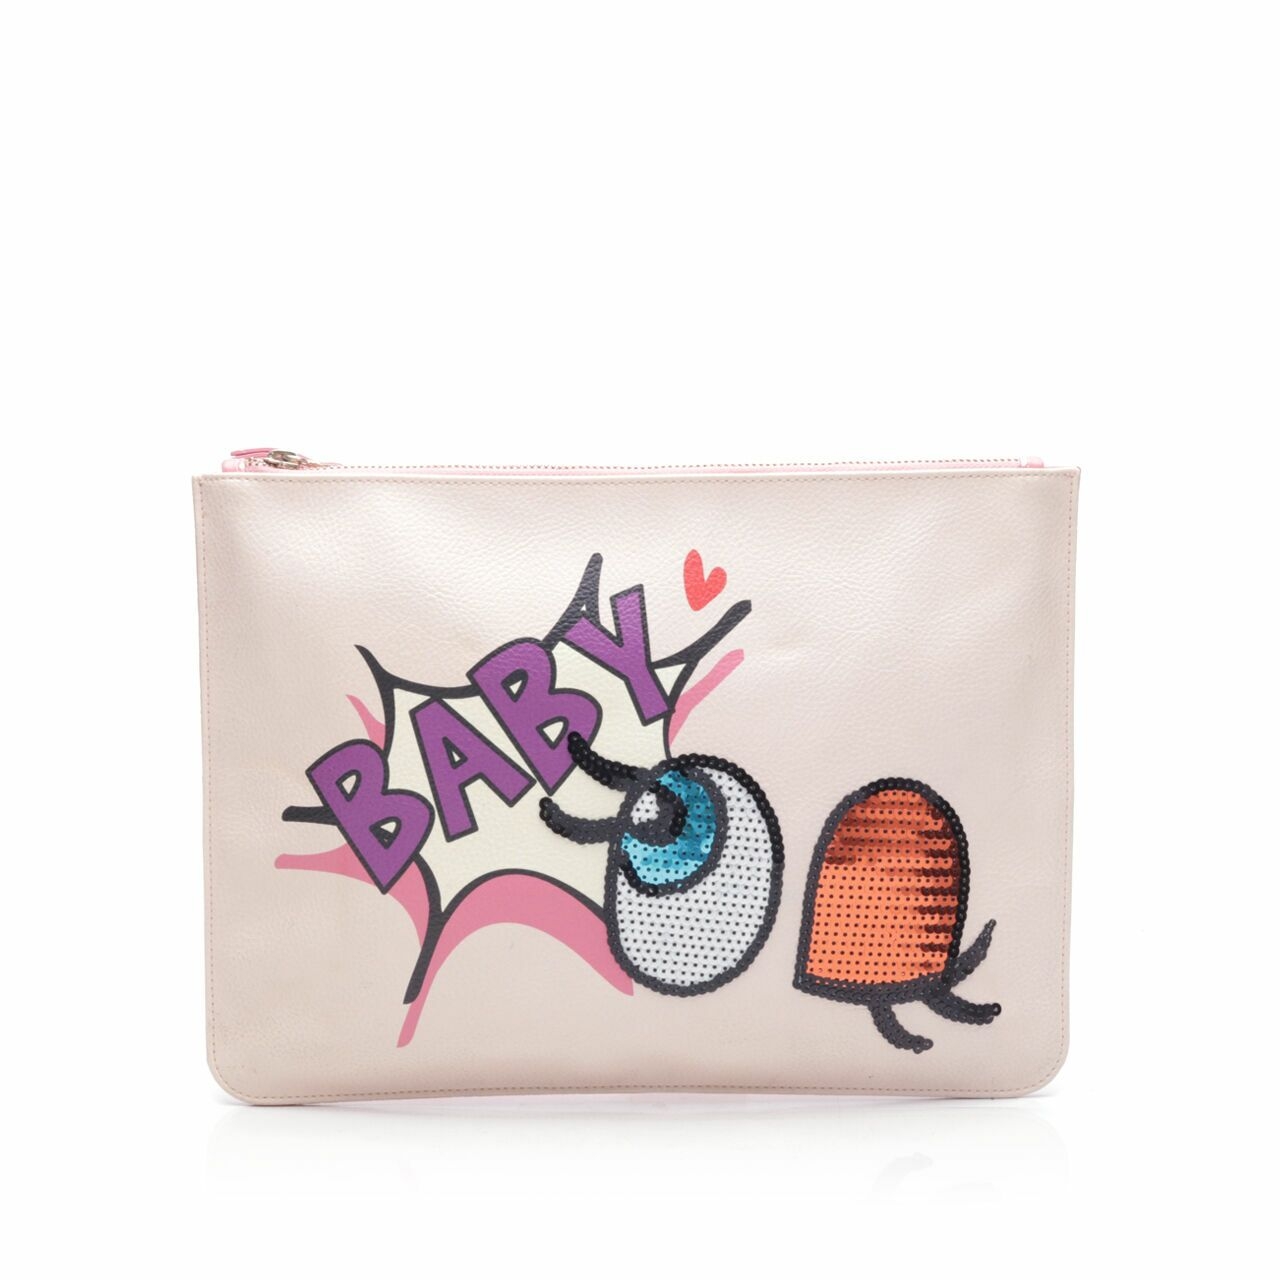 Play No More Pink Clutch